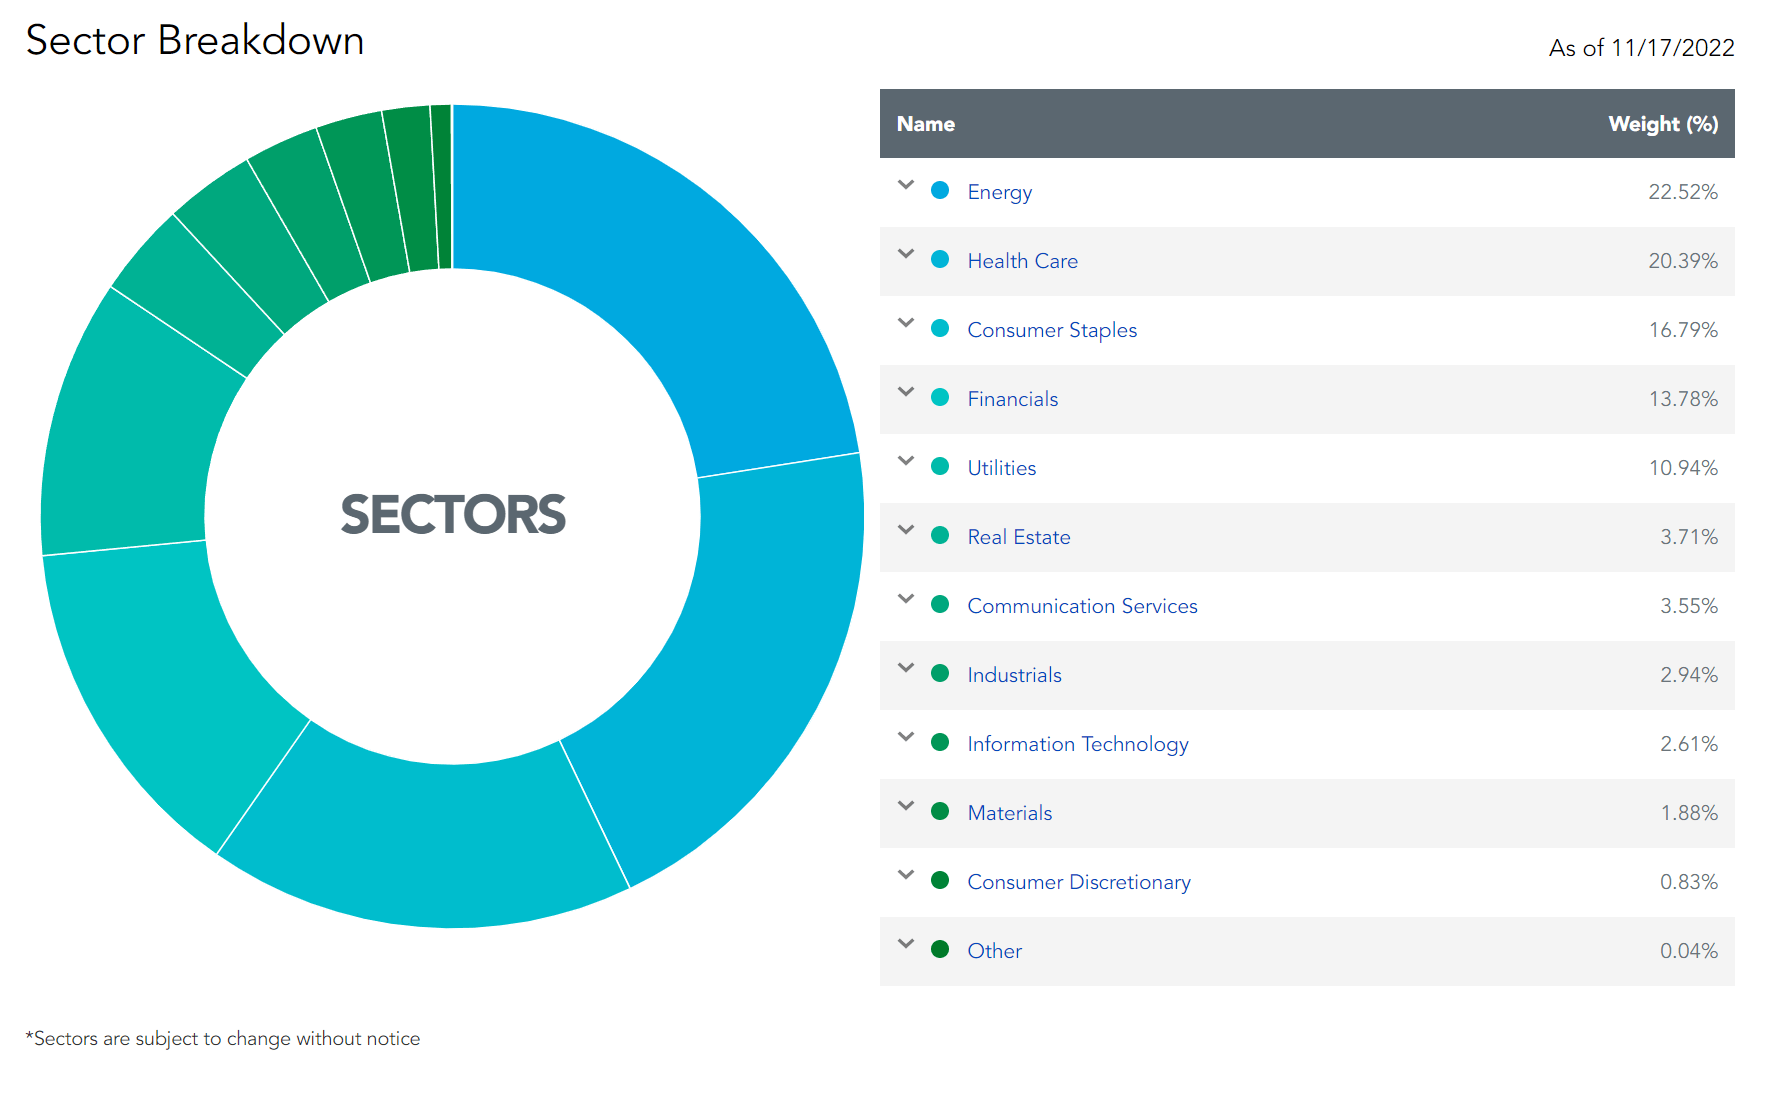 DHS sector weights as of November 2022